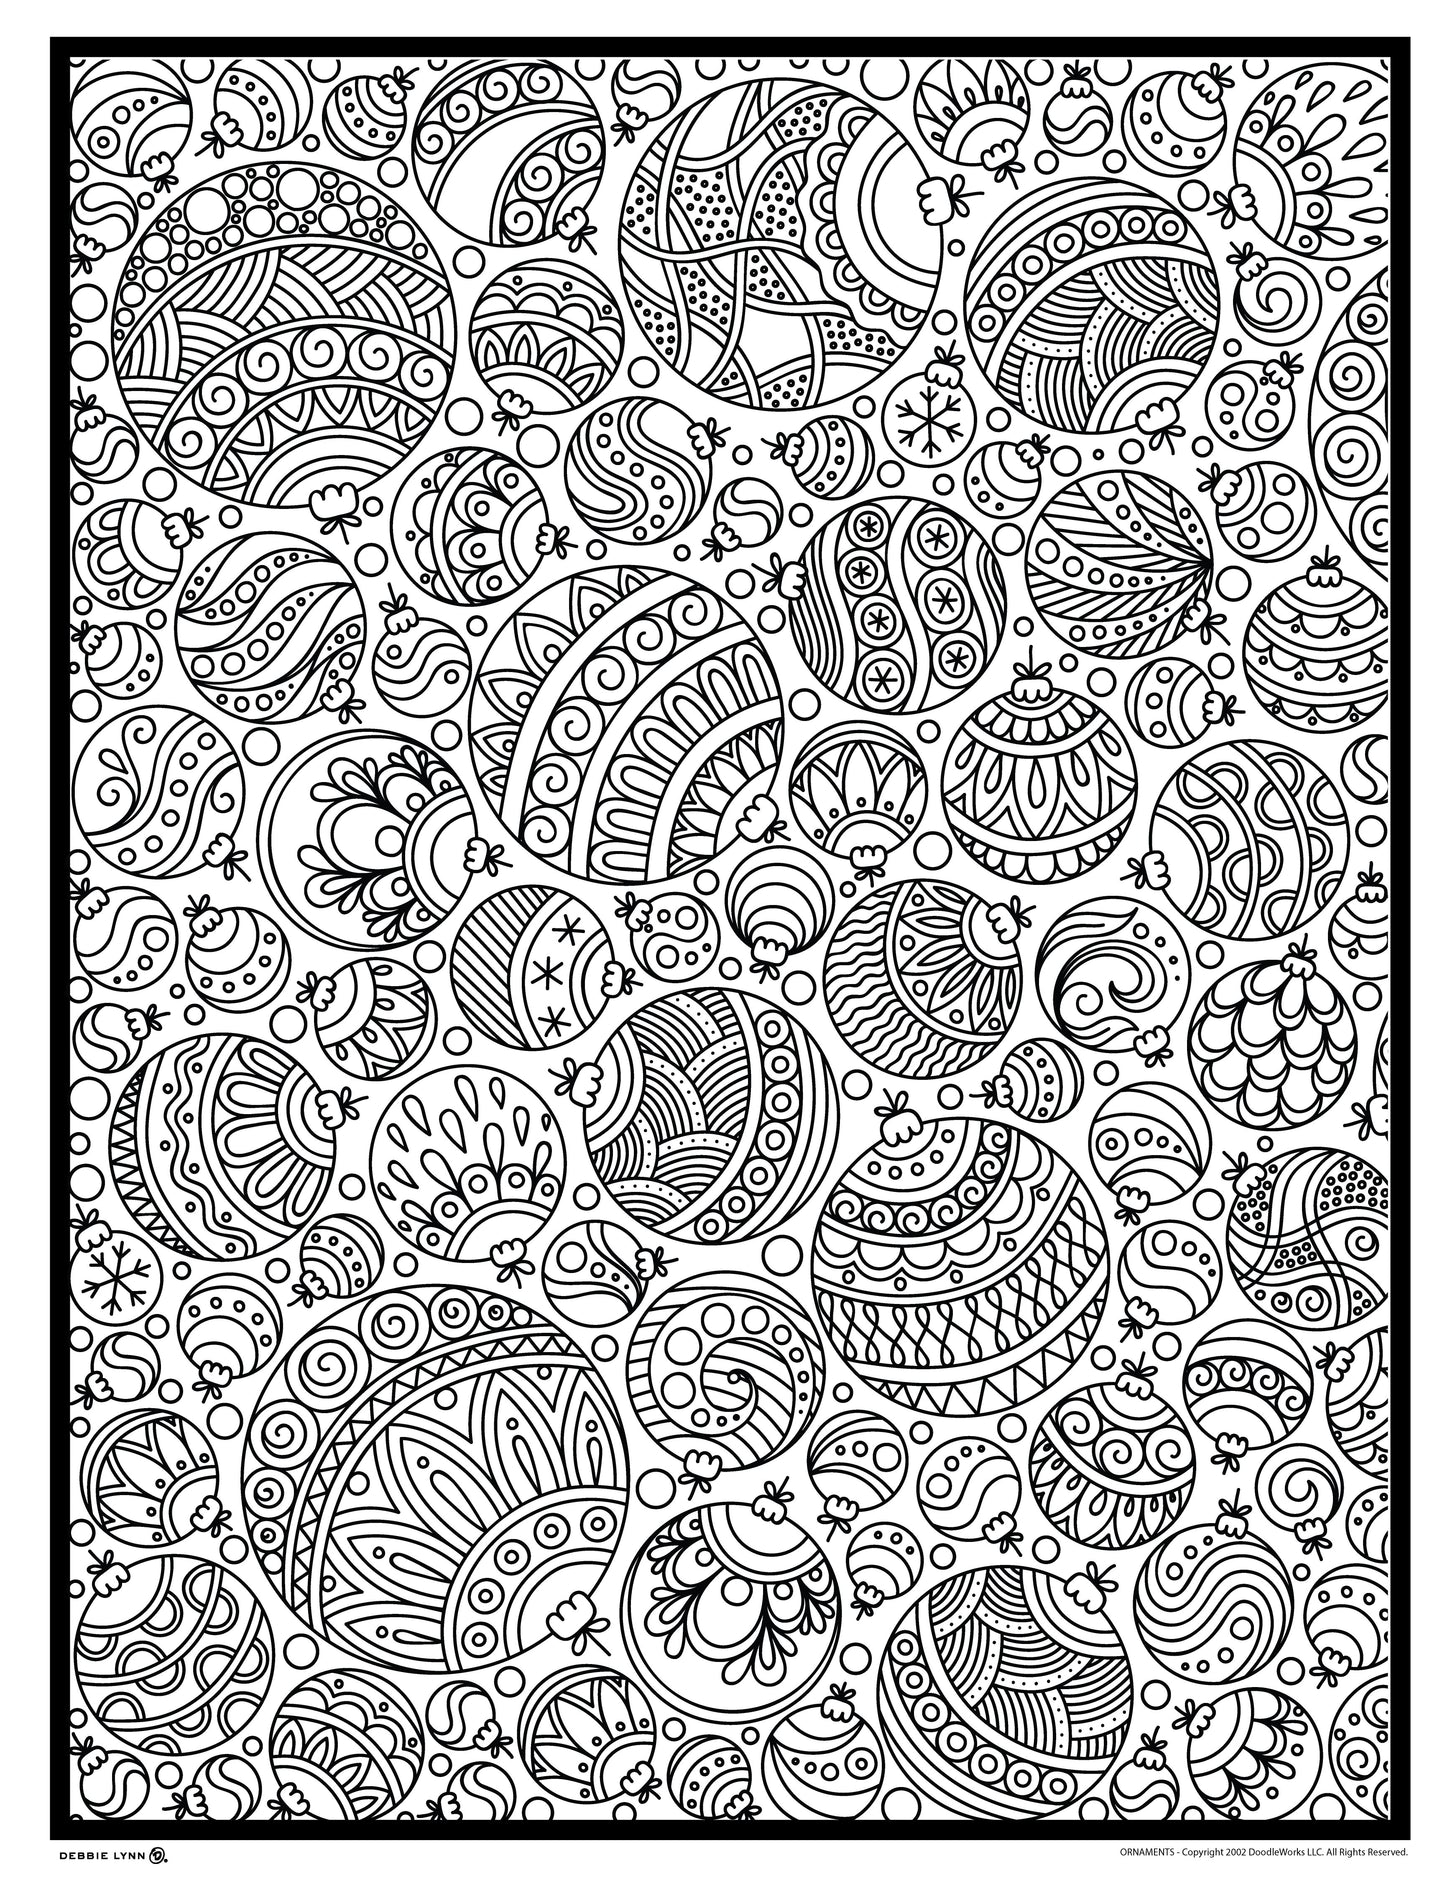 Ornaments Personalized Giant Coloring Poster 46"x60"